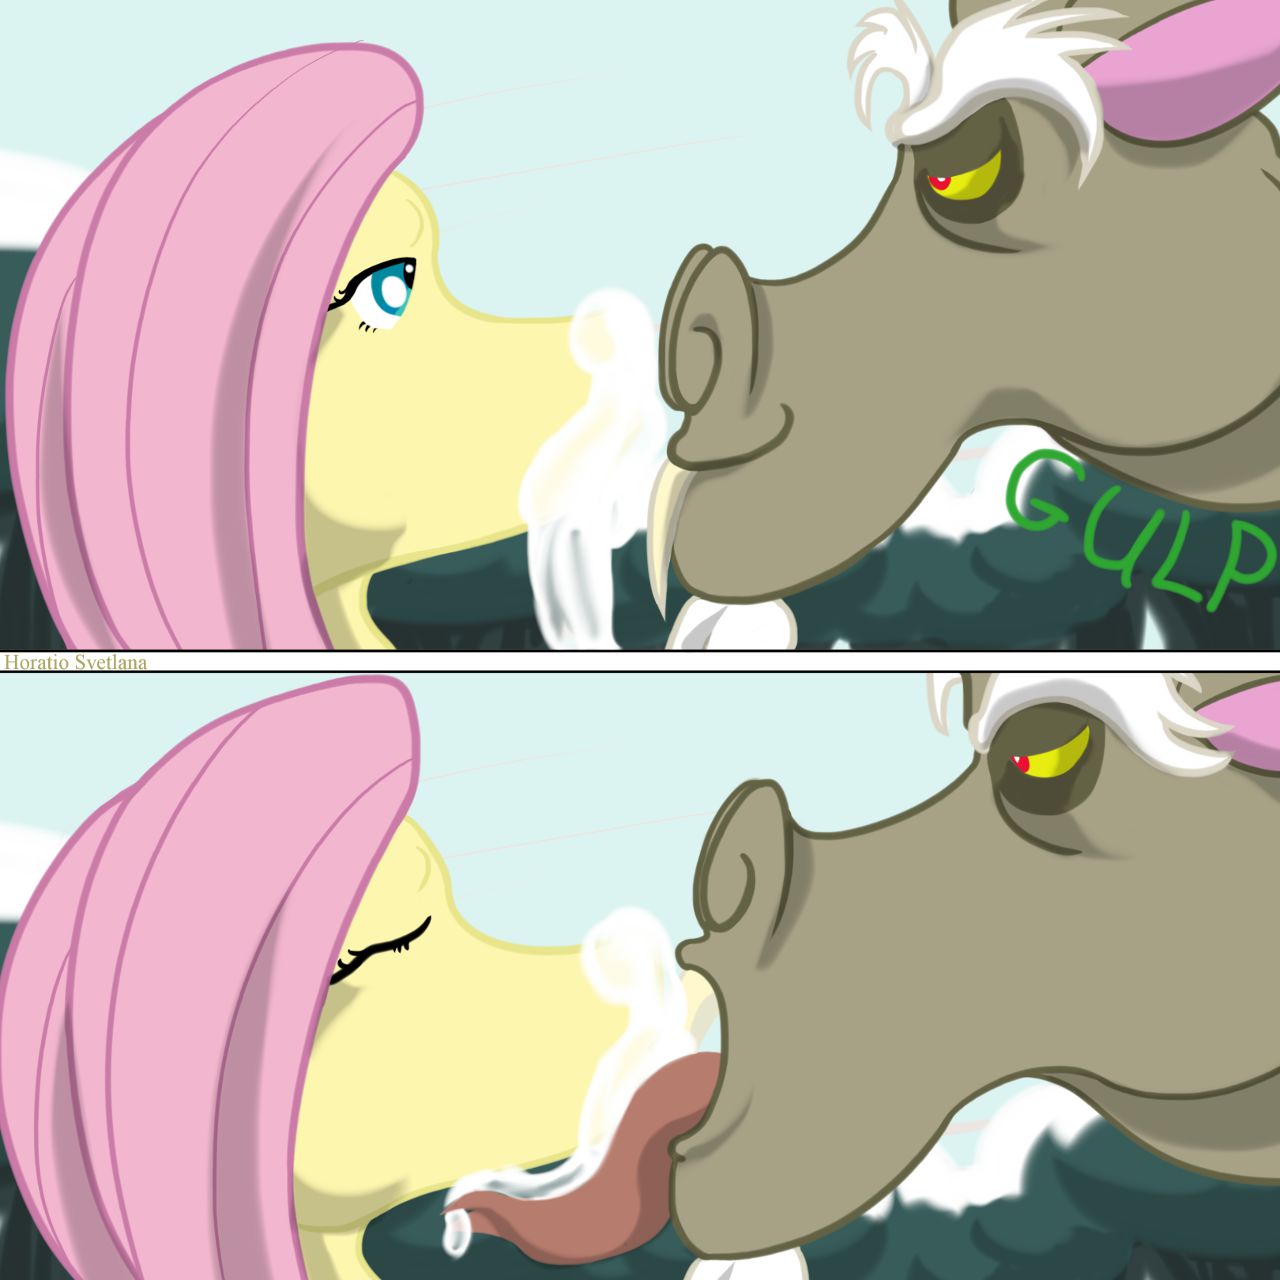 [Horatio Svetlana] Fluttershy's Discord Day (My Little Pony Friendship Is Magic) [Ongoing] 13